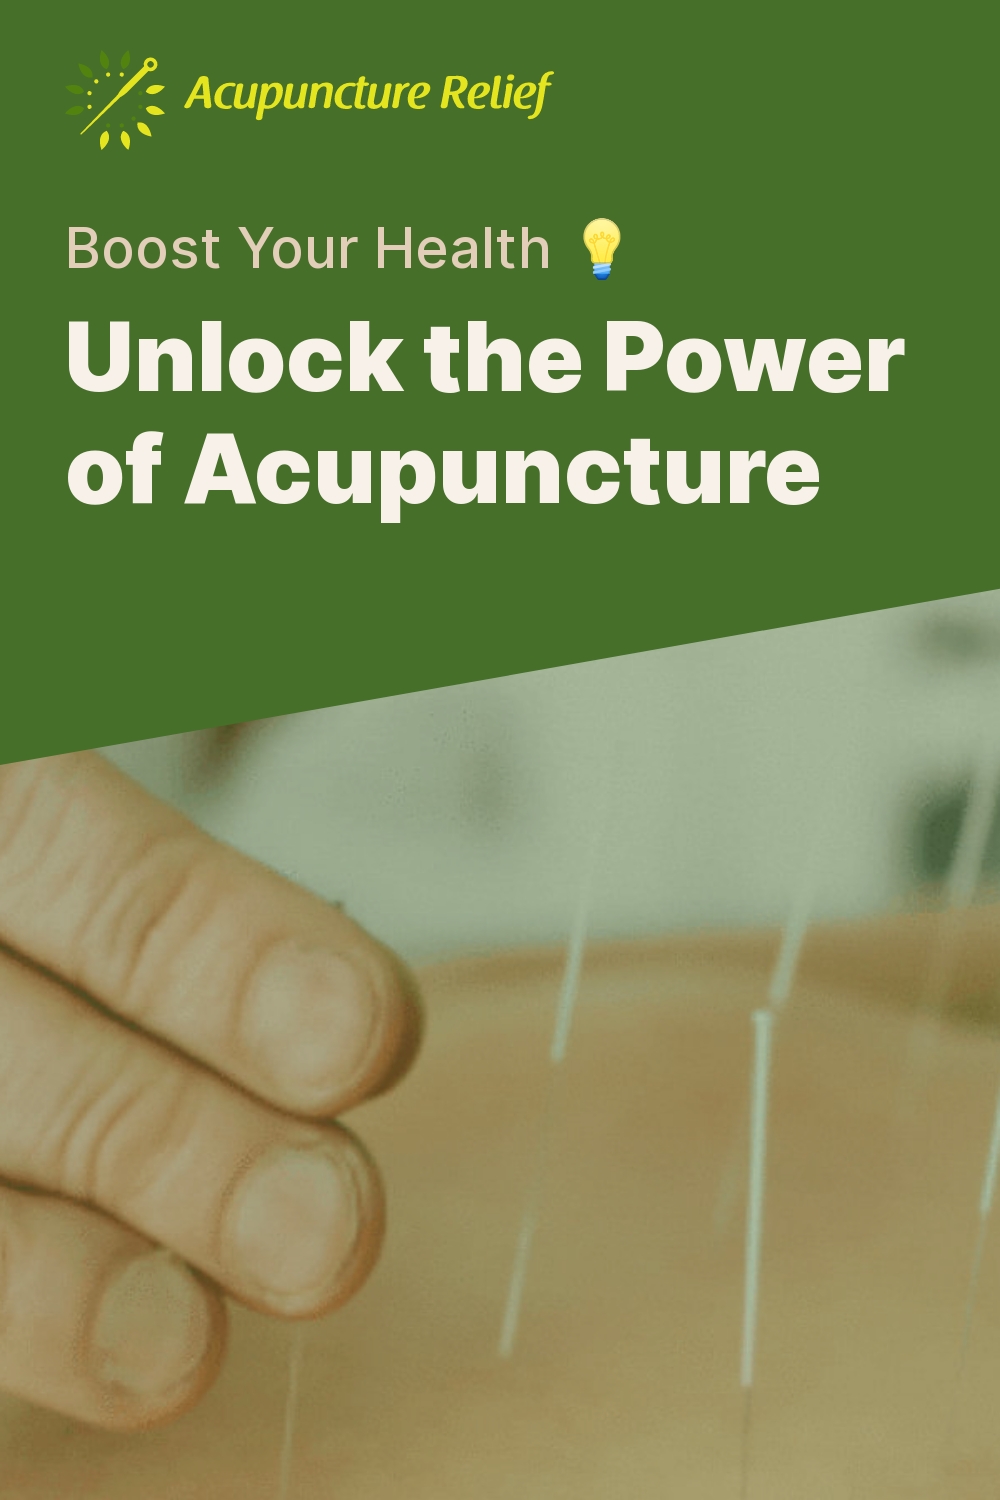 Unlock the Power of Acupuncture - Boost Your Health 💡